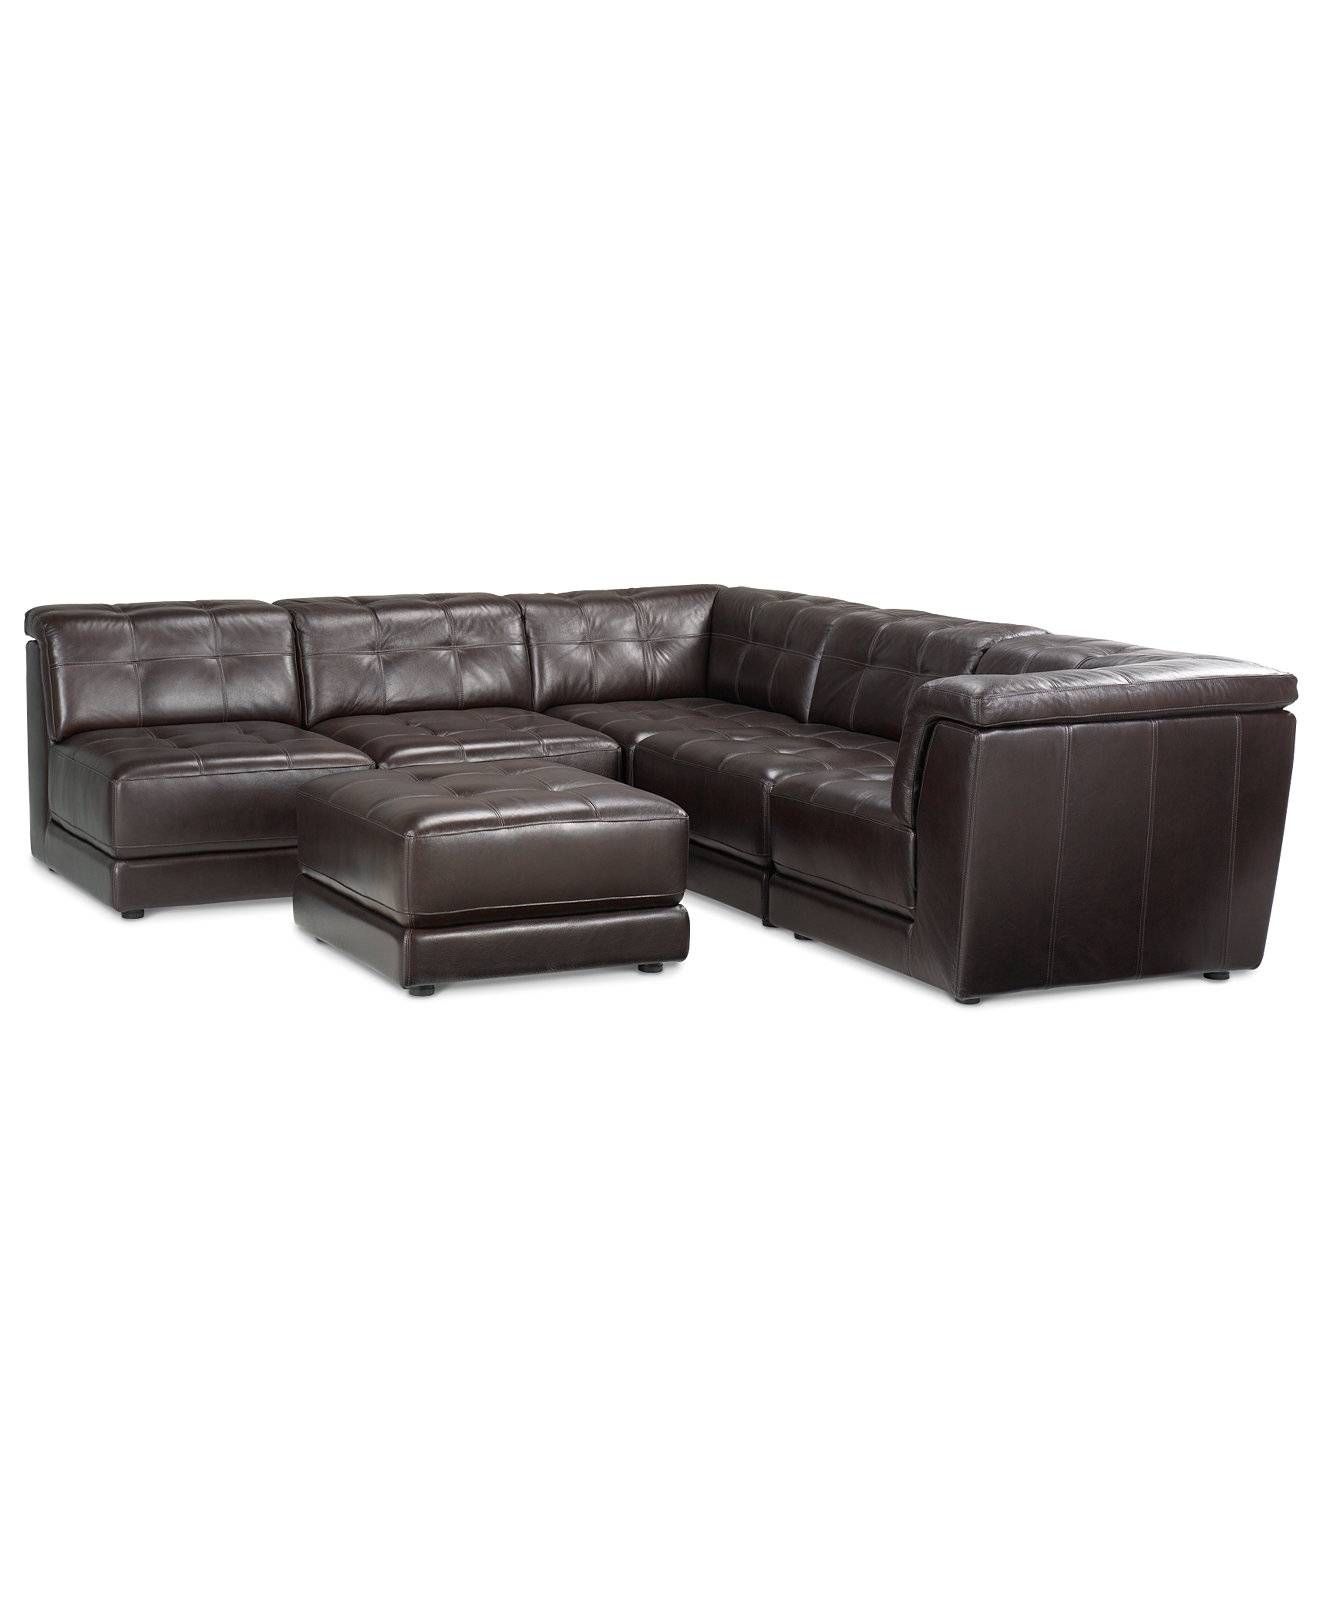 Cozy 6 Piece Leather Sectional Sofa 80 With Additional Camel Throughout Camel Colored Sectional Sofa (View 29 of 30)